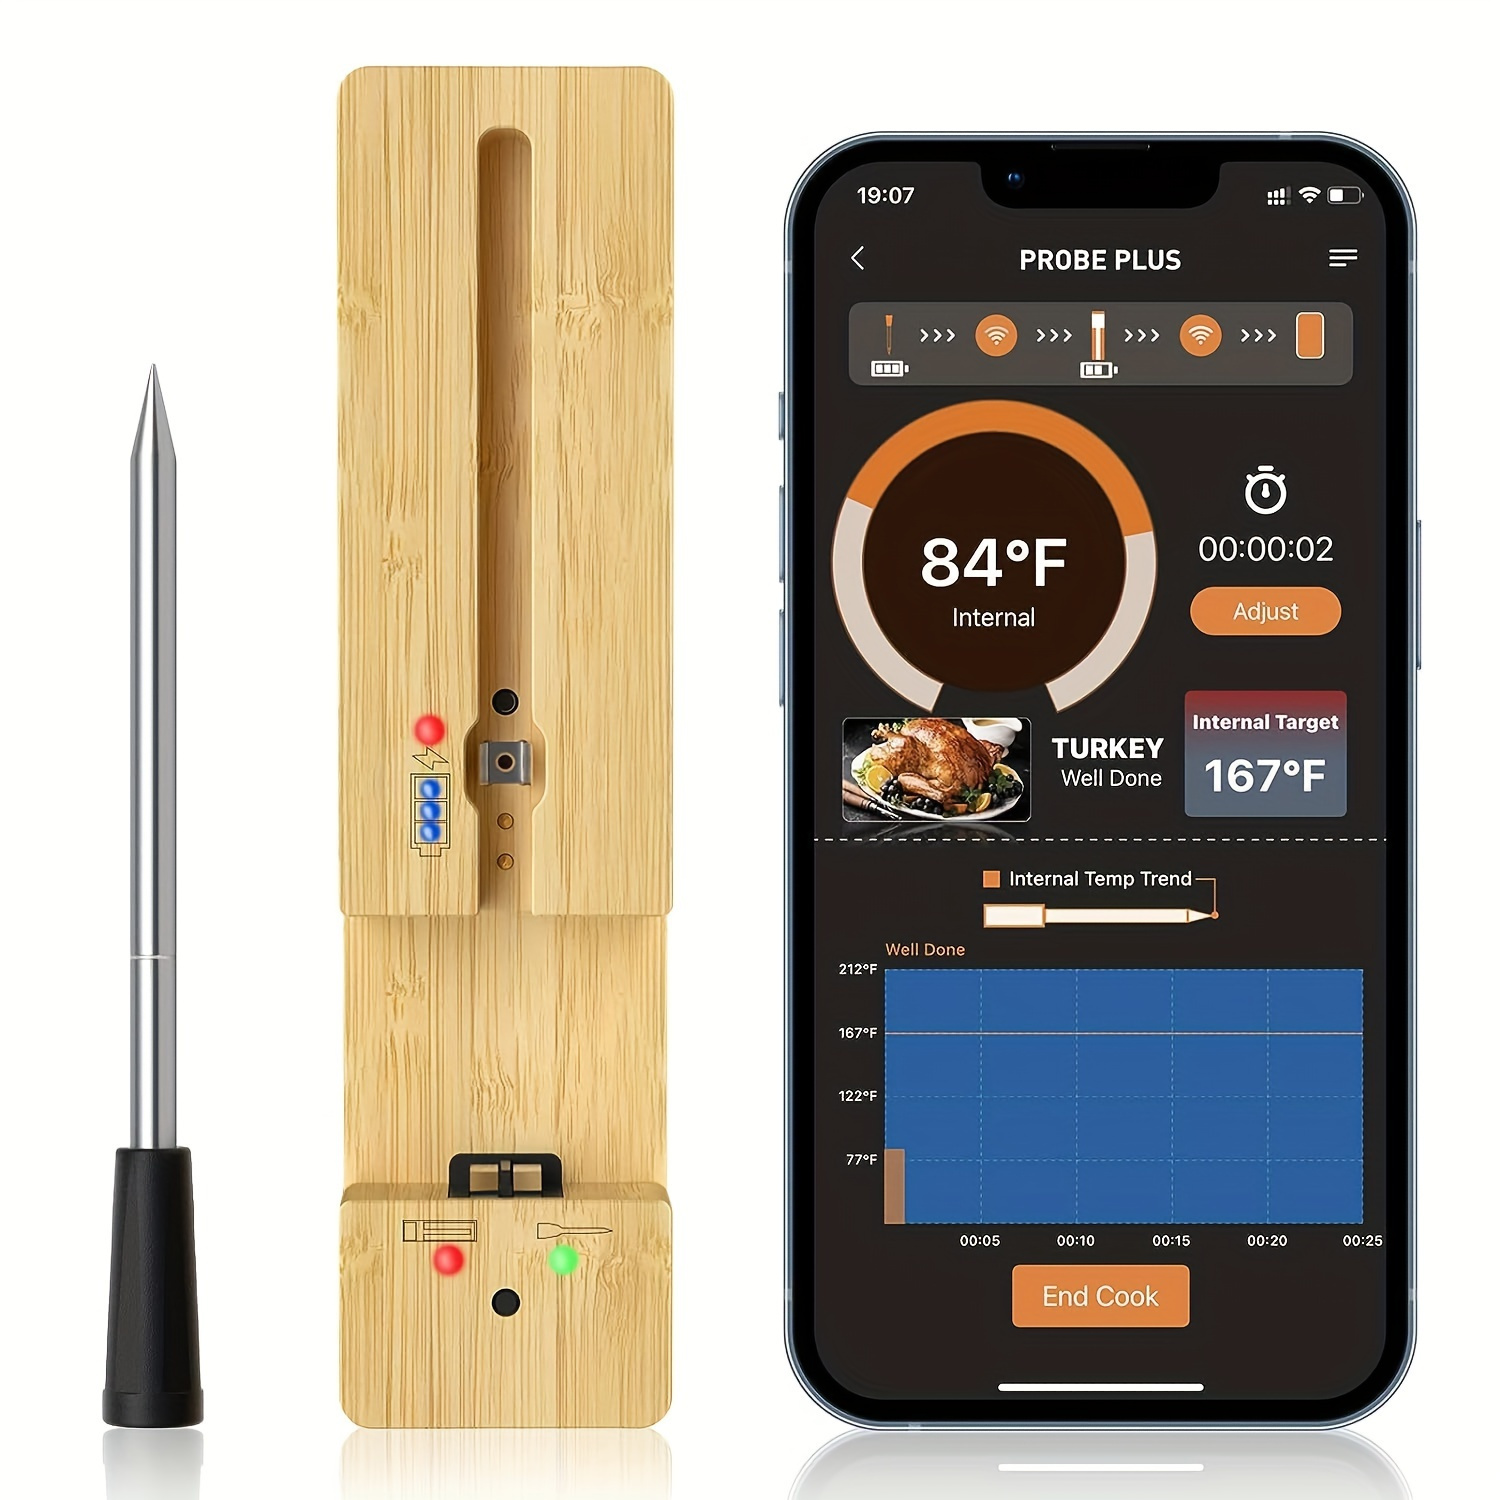 Smart Oven Thermometer - Monitor Cooking, Smart Oven Thermometer and Connected Mobile App with 4 Probes